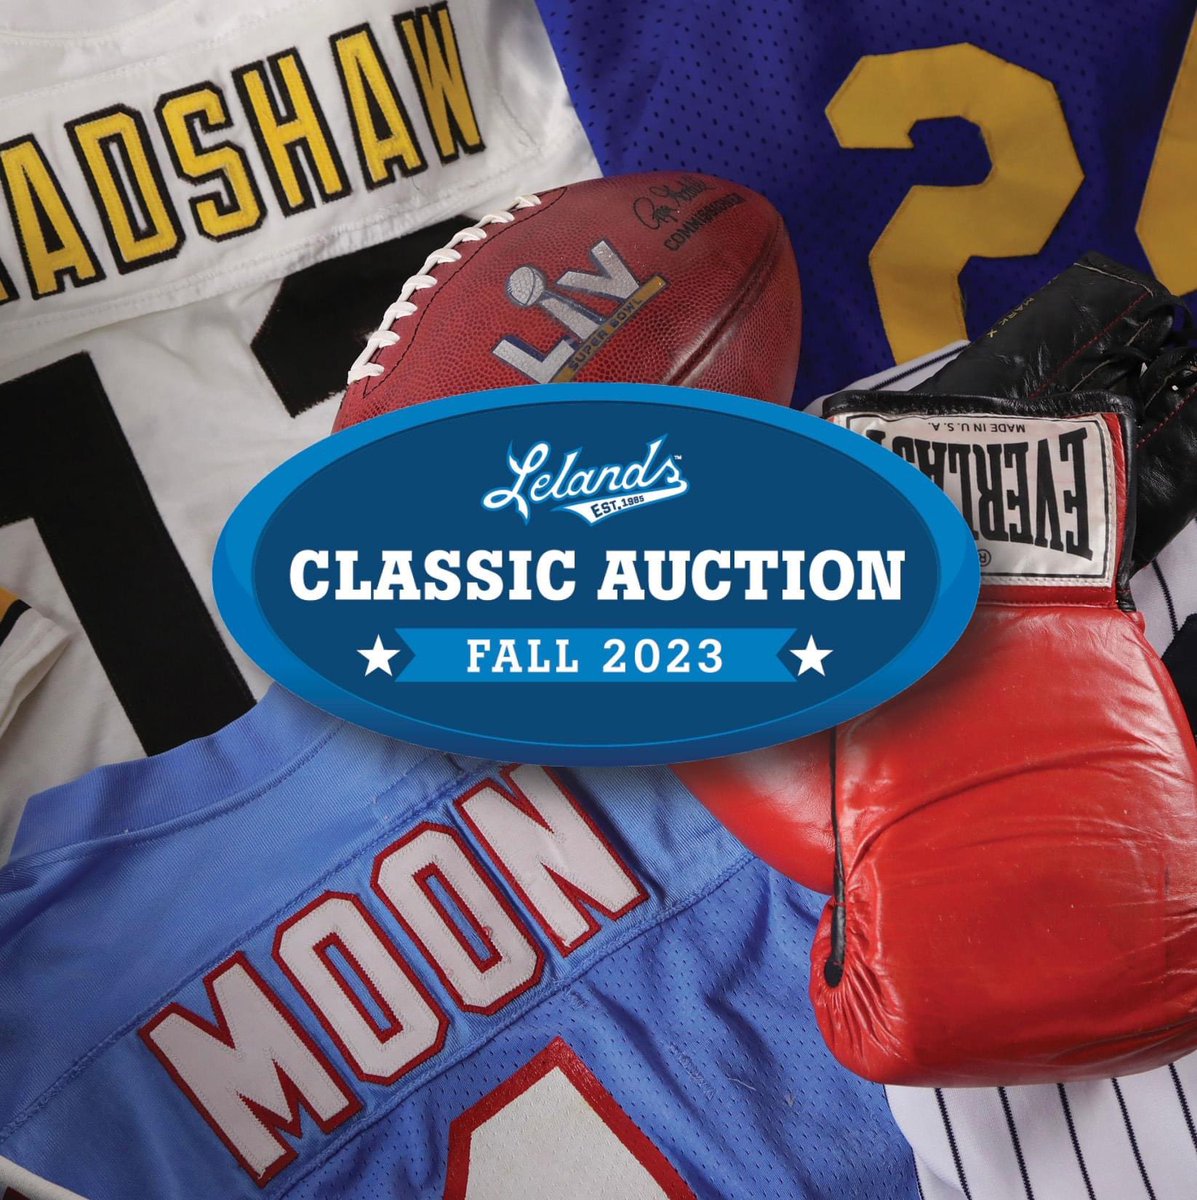 Last Call to Win Big! The Lelands Fall Classic Auction is wrapping up tonight at 10 PM ET for regular bidding. Don't let this opportunity slip away! Bid on game-used treasures from Bradshaw, Moon, Brady, Tyson, and more legendary sports heroes. lelands.com